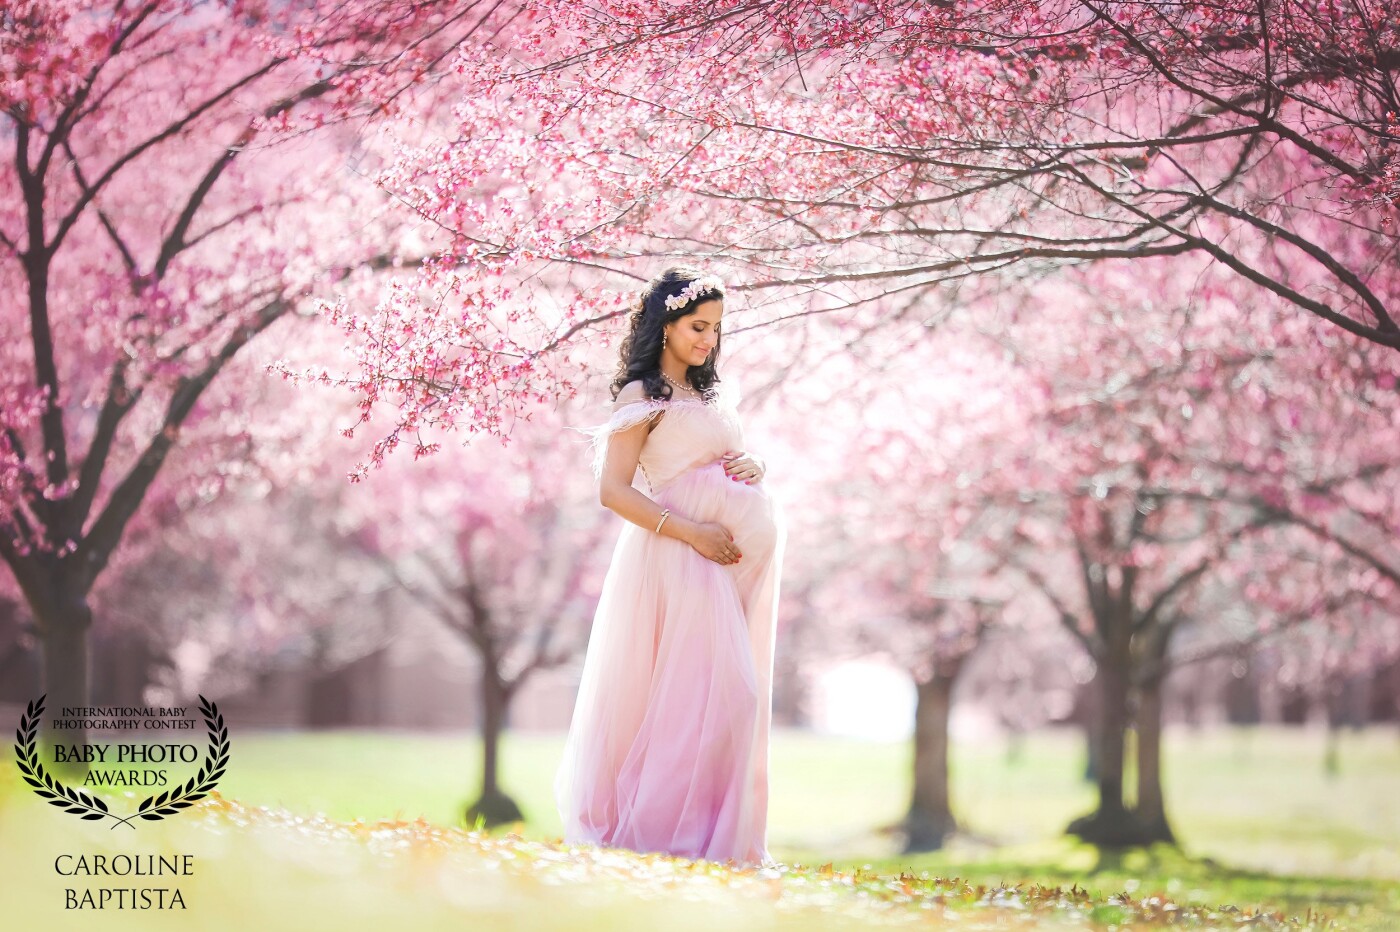 Some of my favorite locations to photograph my maternity clients are the beautiful flower fields surrounding the NYC area. They really are incredible-fields of tulips, azaleas, roses, lilacs, daffodils- so many gorgeous spots I am grateful to live and work here! This mom was pretty in pink during the April cherry blossom blooms at Branch Brook Park. 